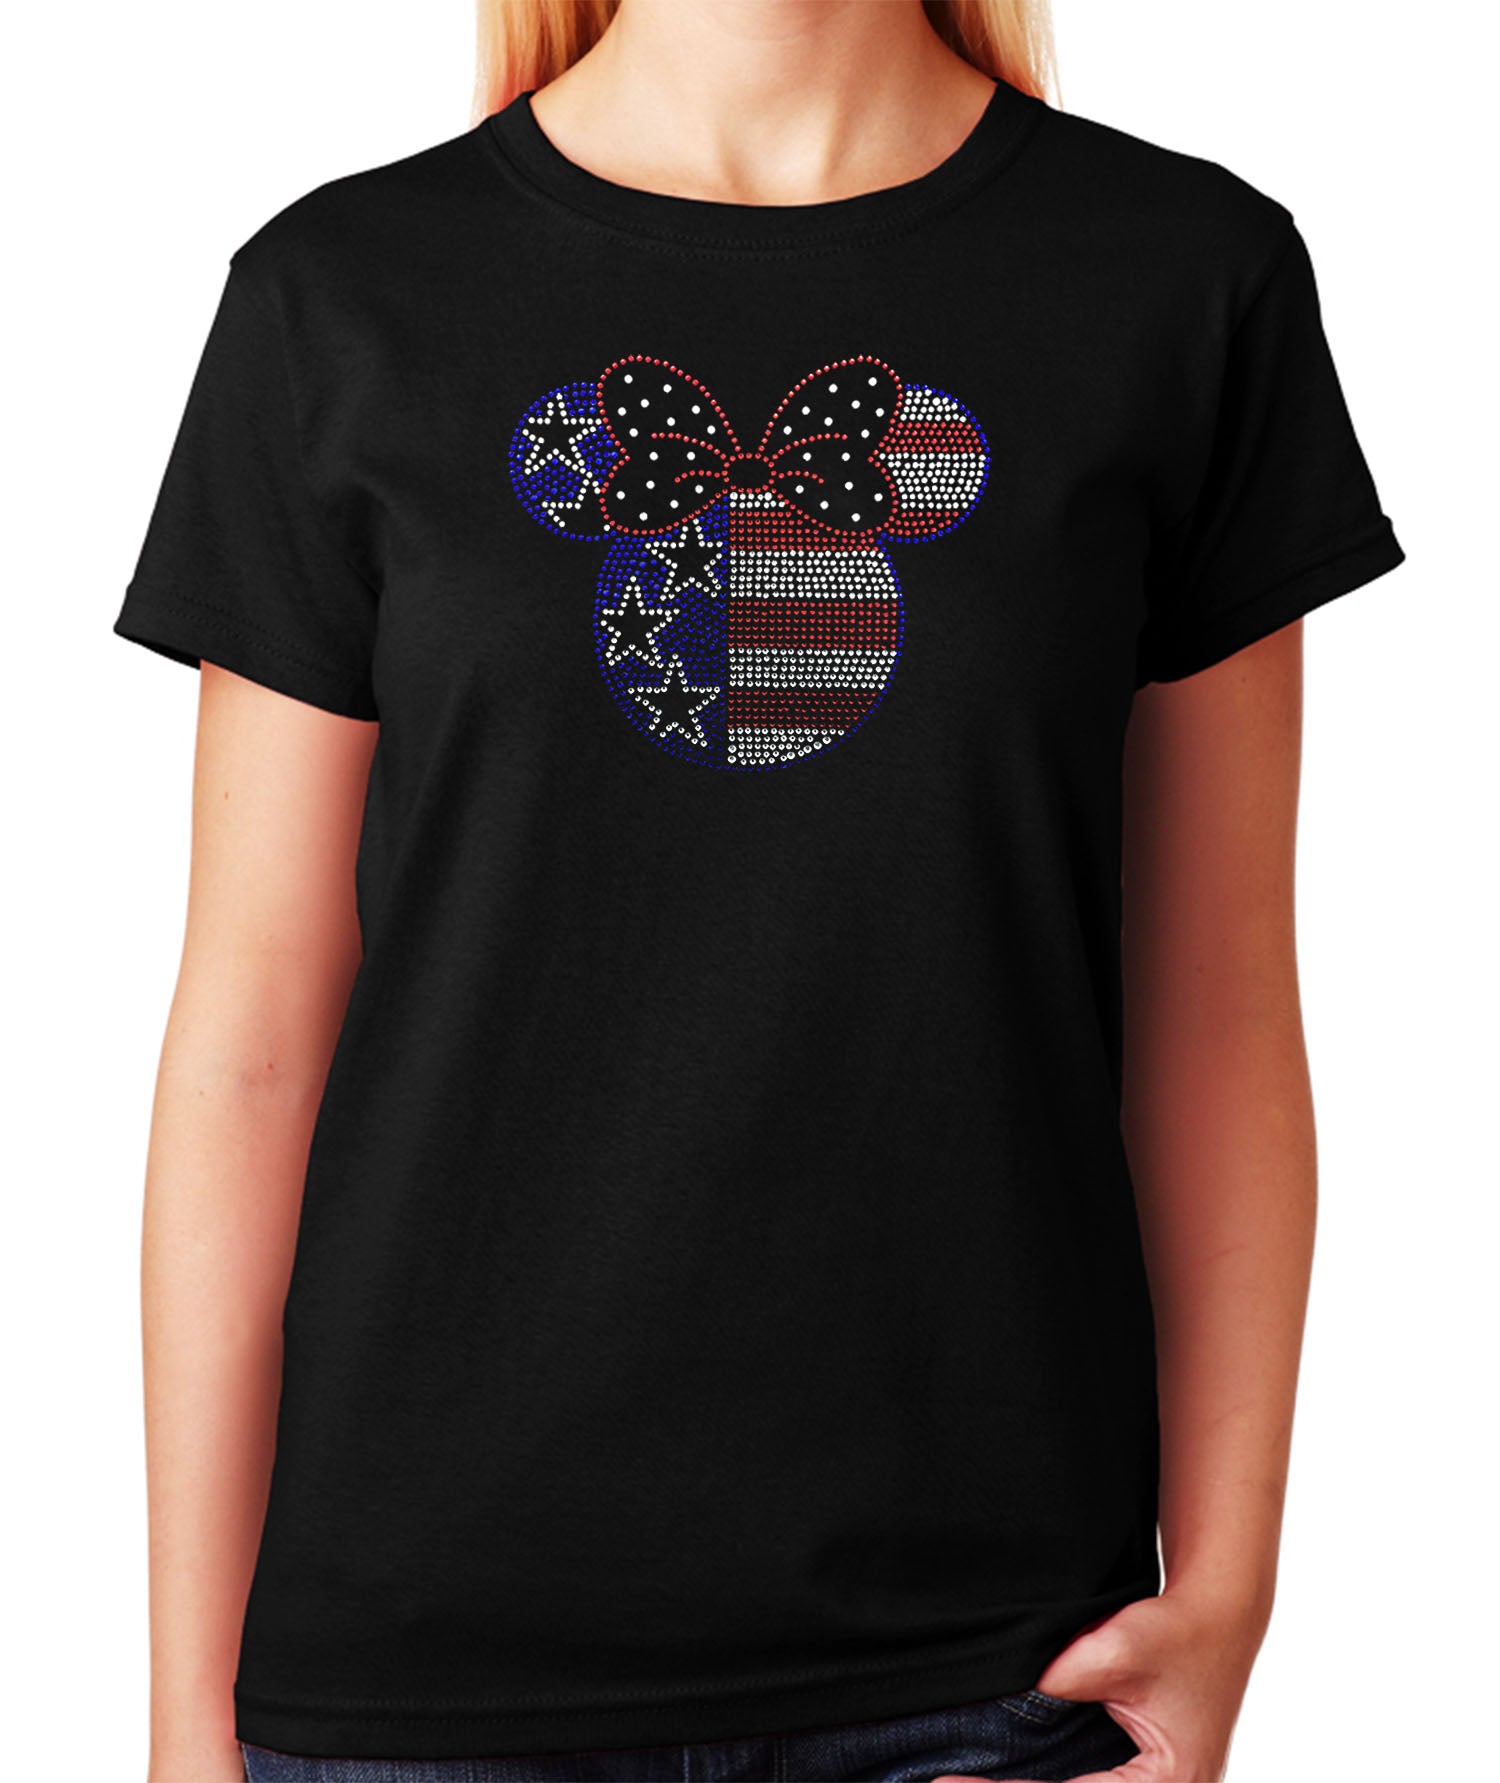 Women's / Unisex T-Shirt with Minnie Head 4th of July in Rhinestones